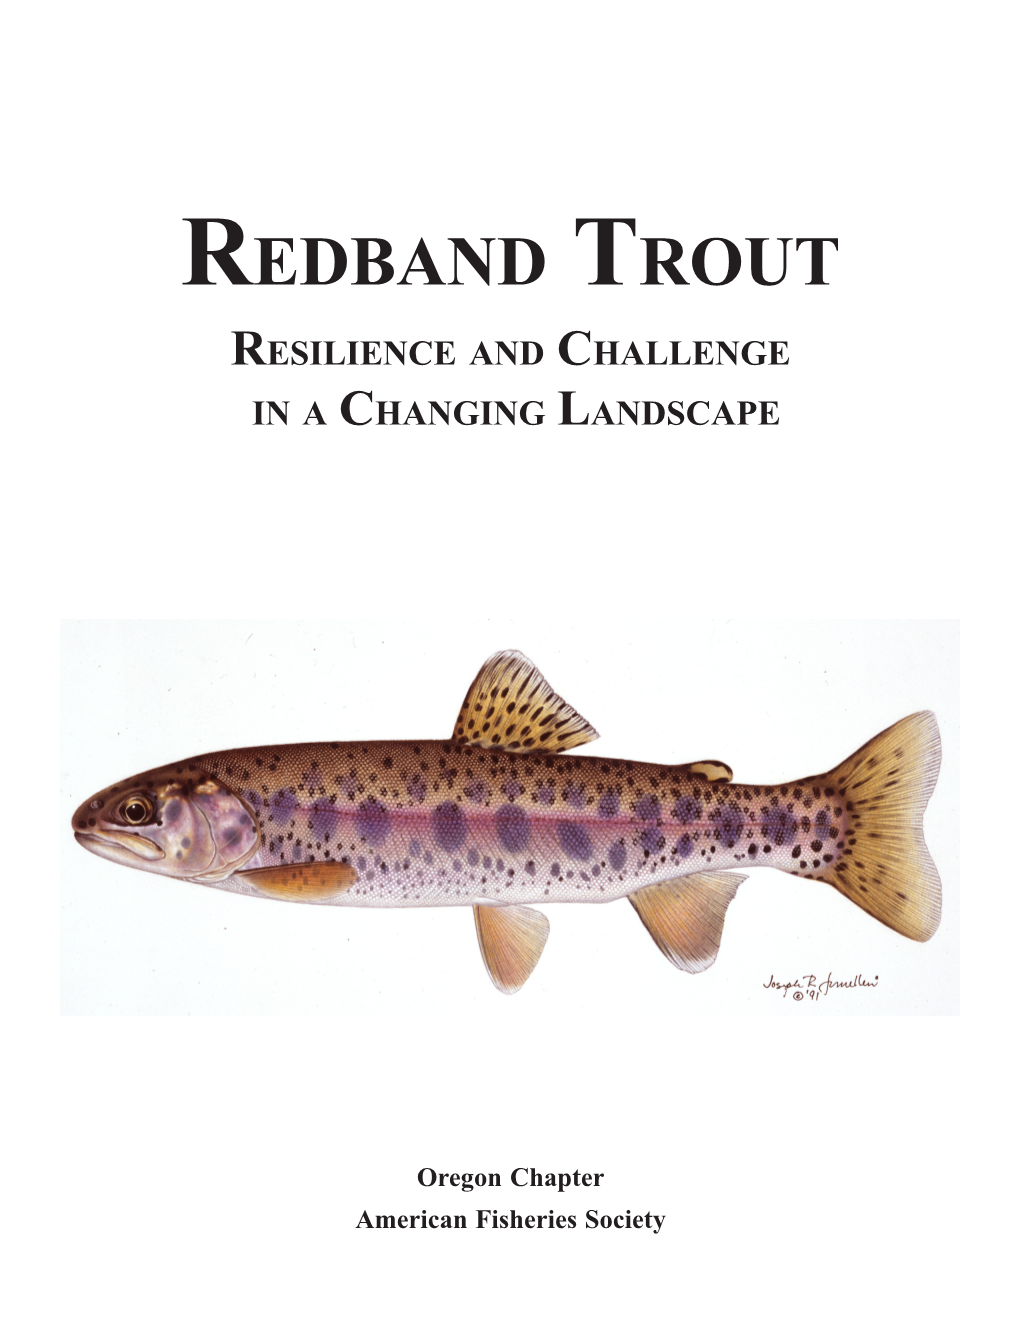 Redband Trout Resilience and Challenge in a Changing Landscape